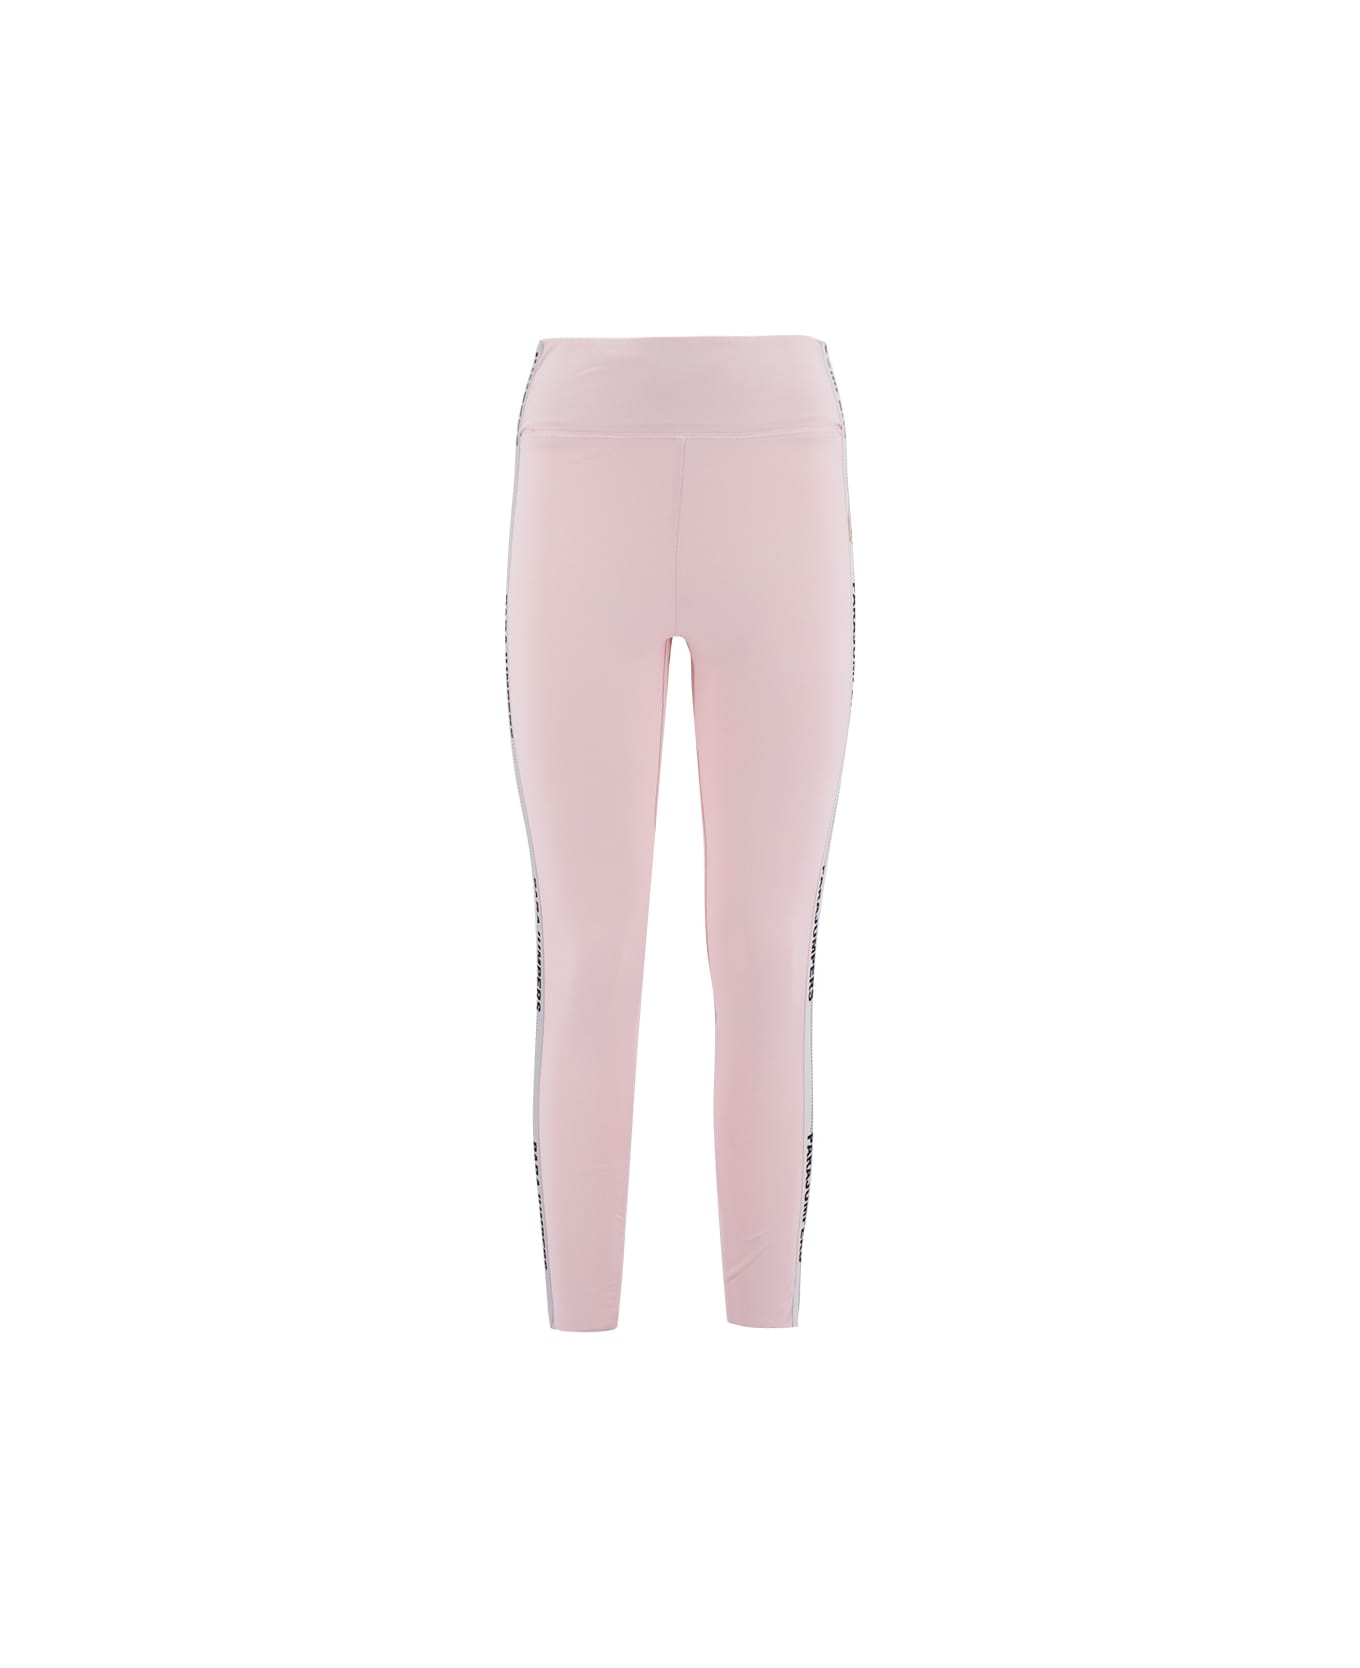 Parajumpers Trousers - SOAP PINK